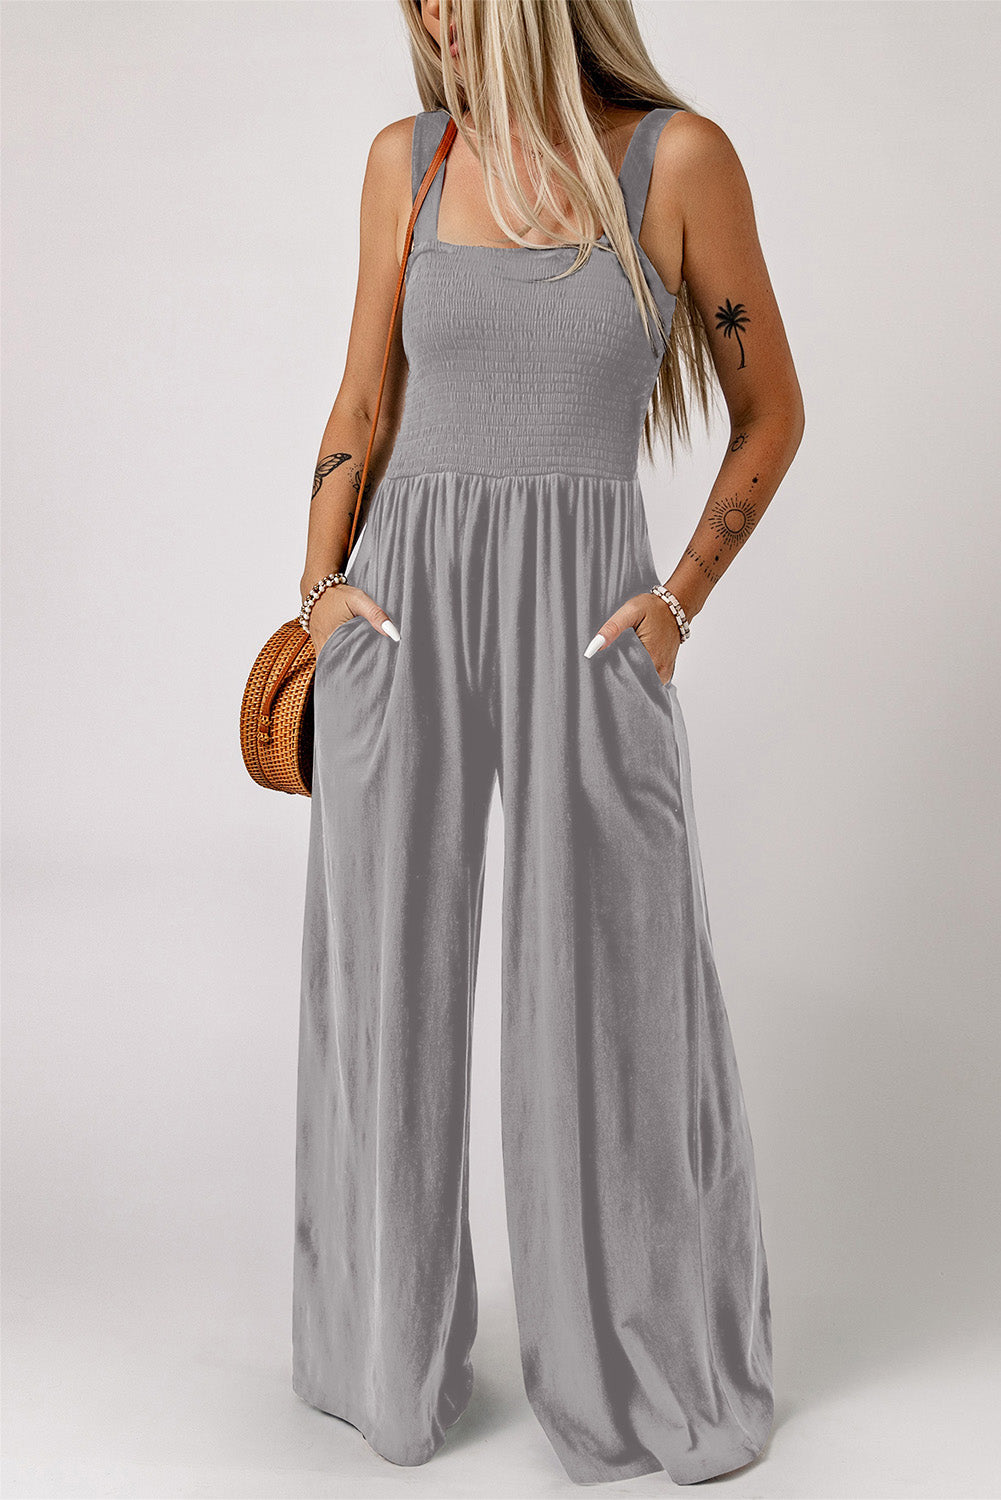 Gray Smocked Square Neck Wide Leg Jumpsuit with Pockets